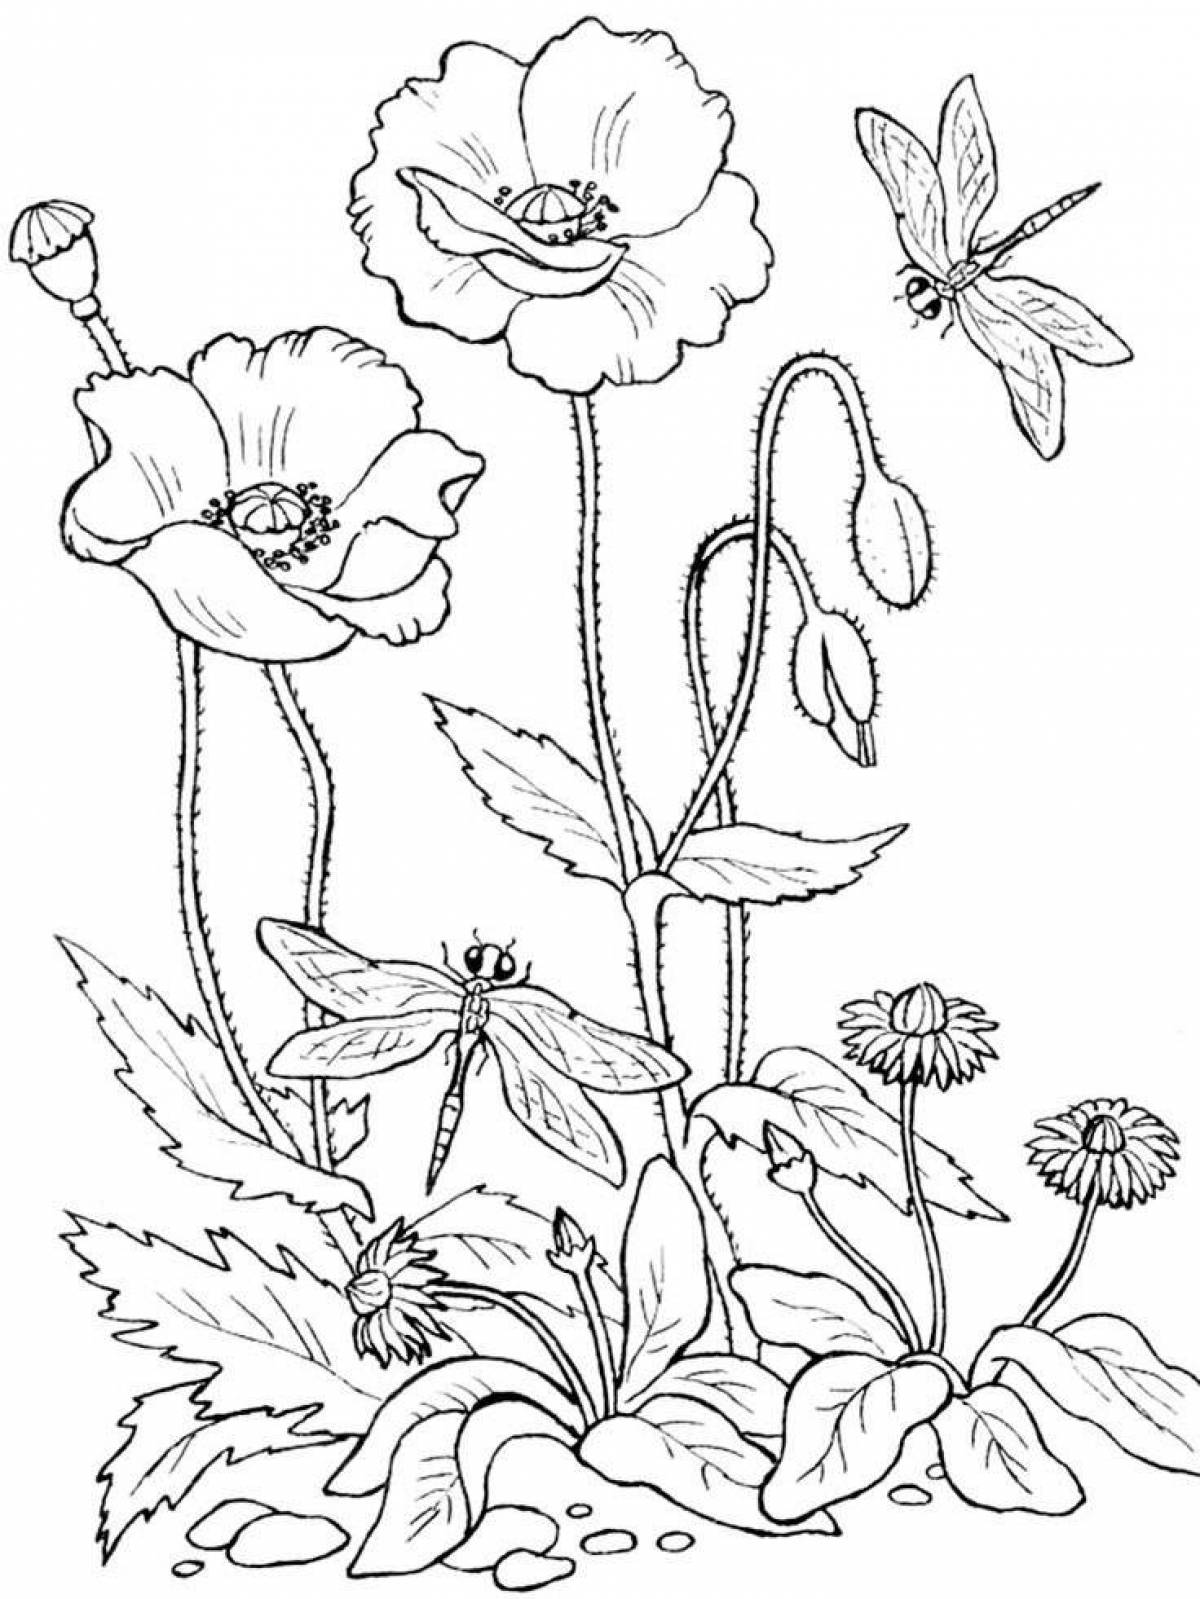 Deluxe flower coloring for heroes